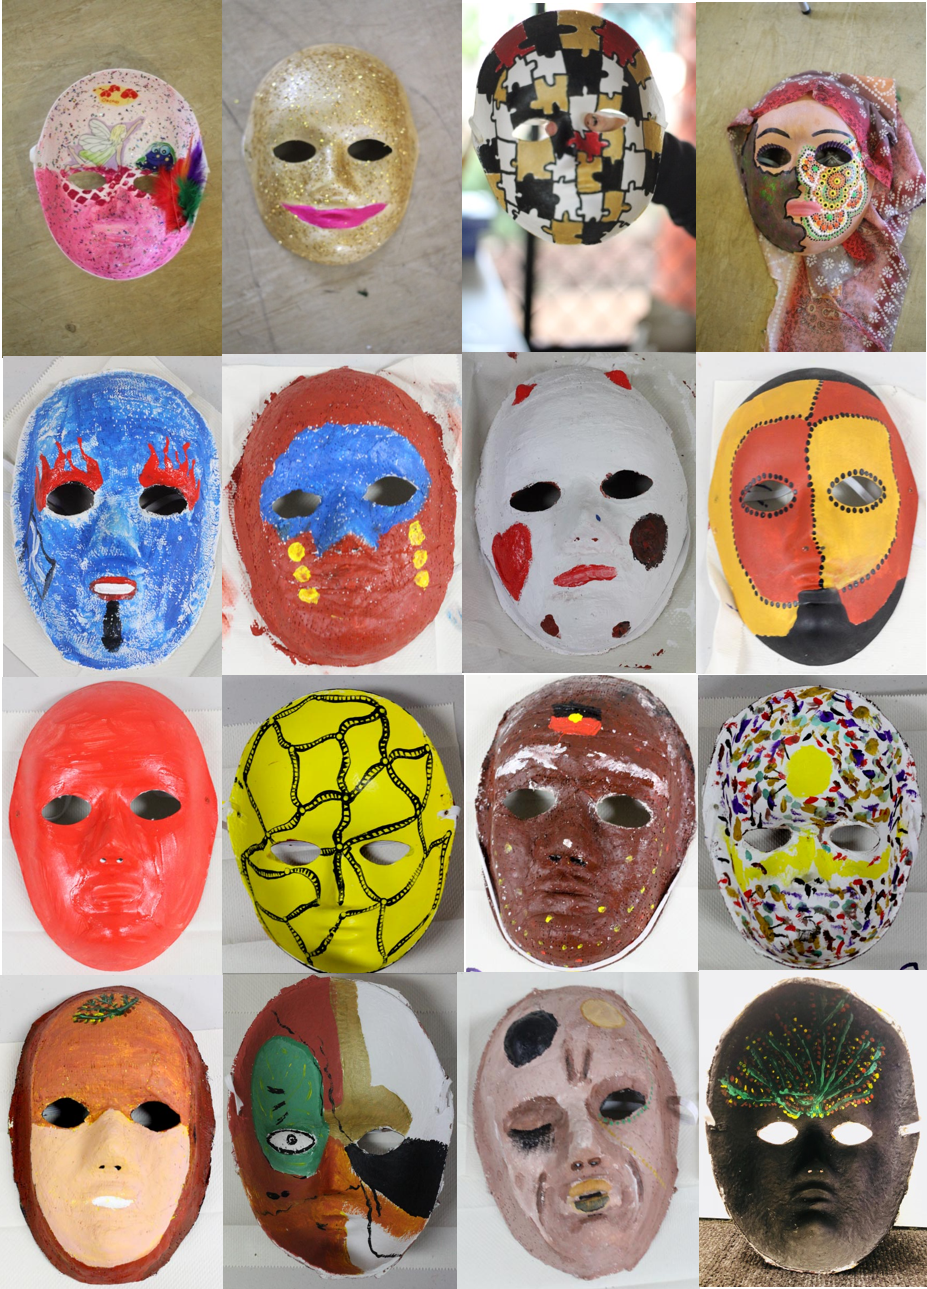 One of the projects the group created, titled 'The Masks We Are.'